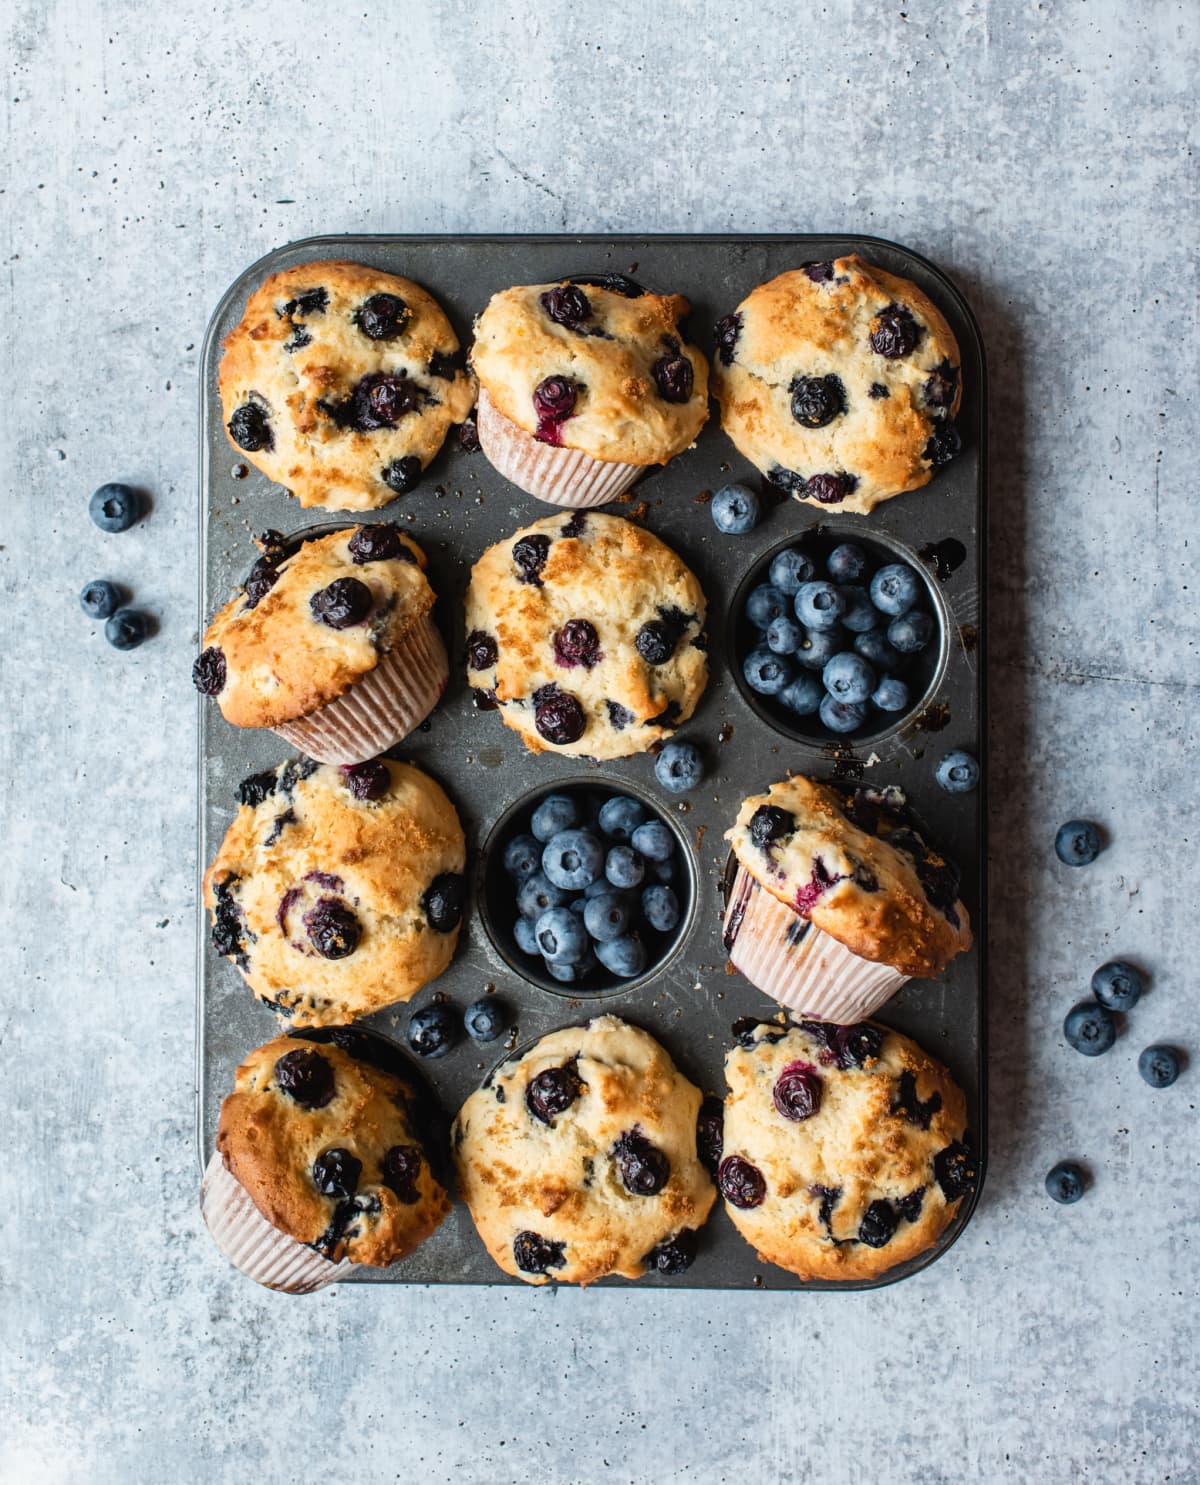 A muffin pan with blueberry muffins